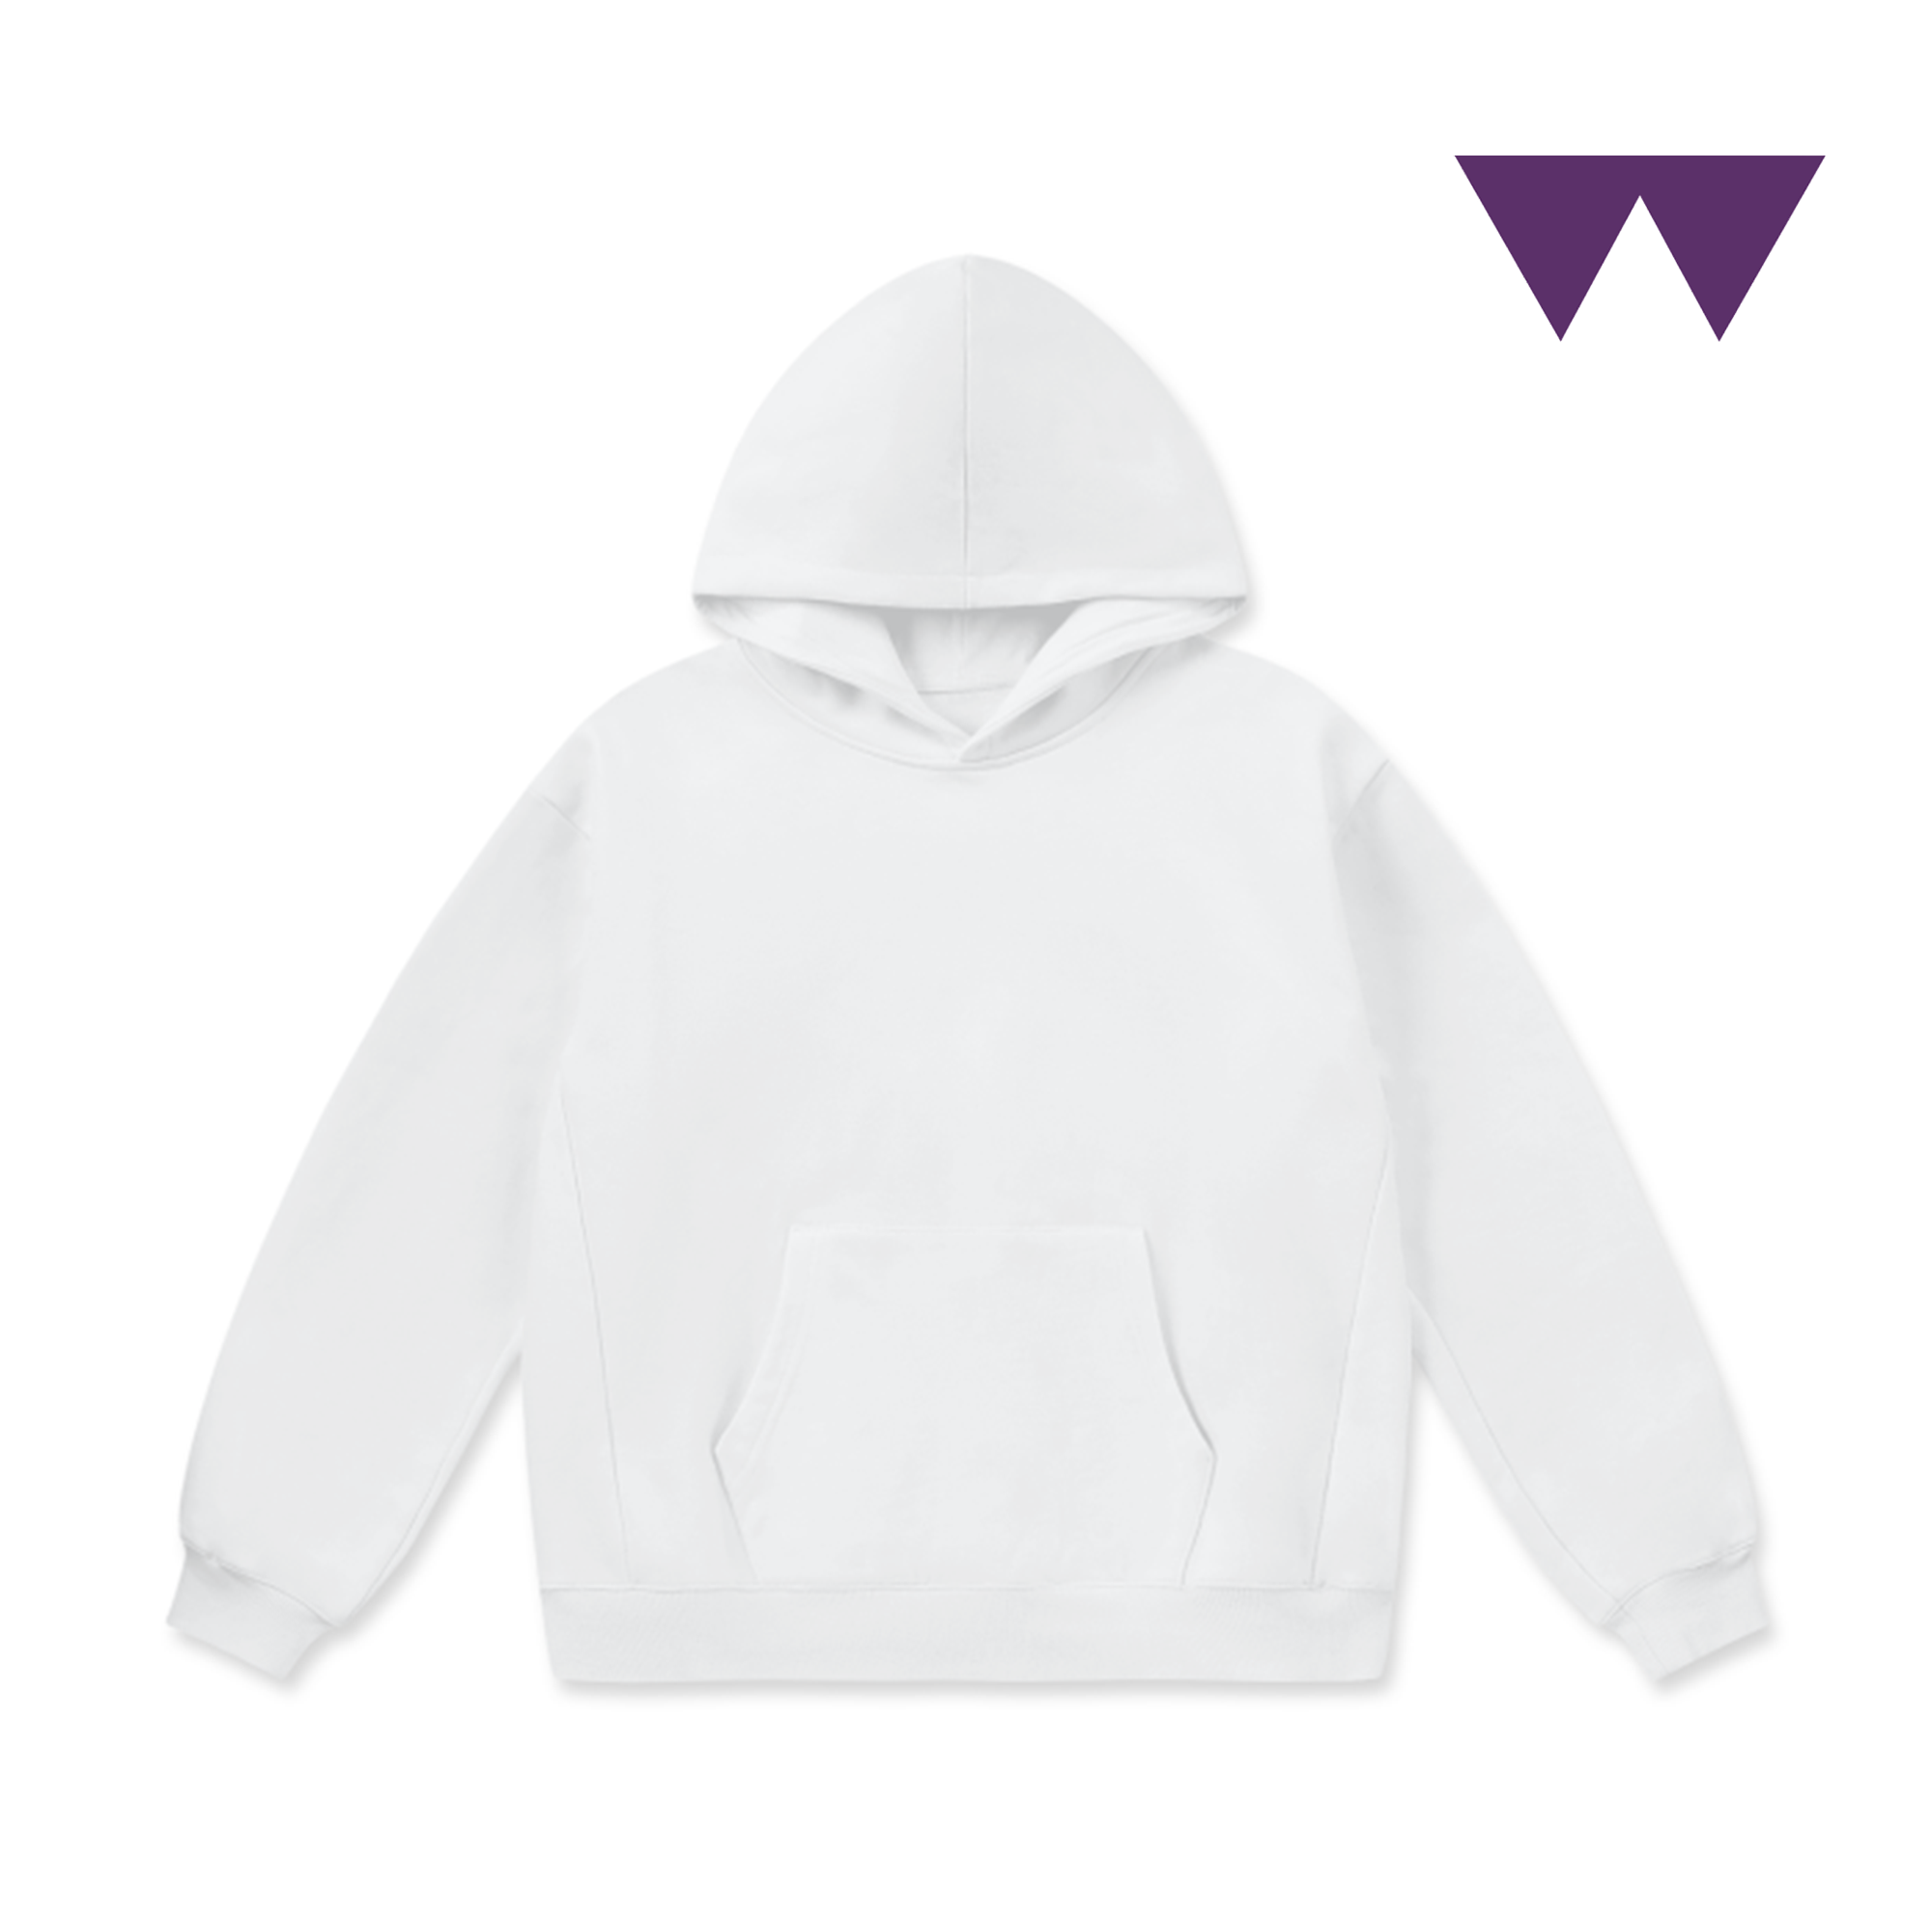 LCC Super Weighted Hoodie - University of Warwick (Classic)